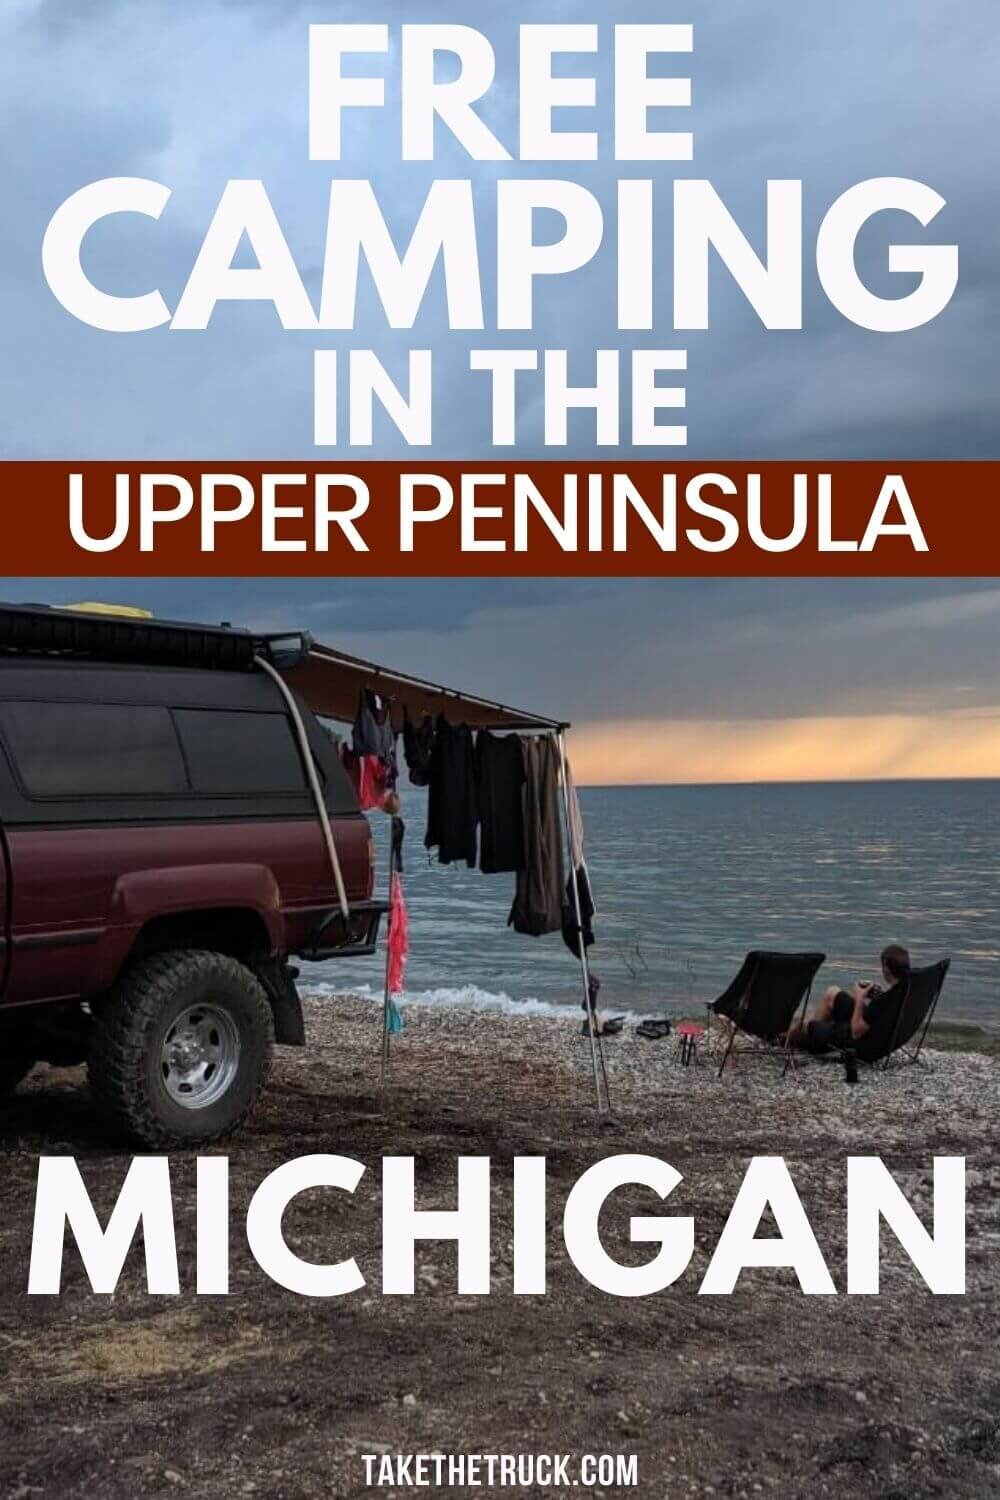 Check out these 12 free camping spots in Michigan’s Upper Peninsula if you’re planning a budget road trip around Michigan or an upper peninsula camping trip! Camp for free in the Upper Peninsula!